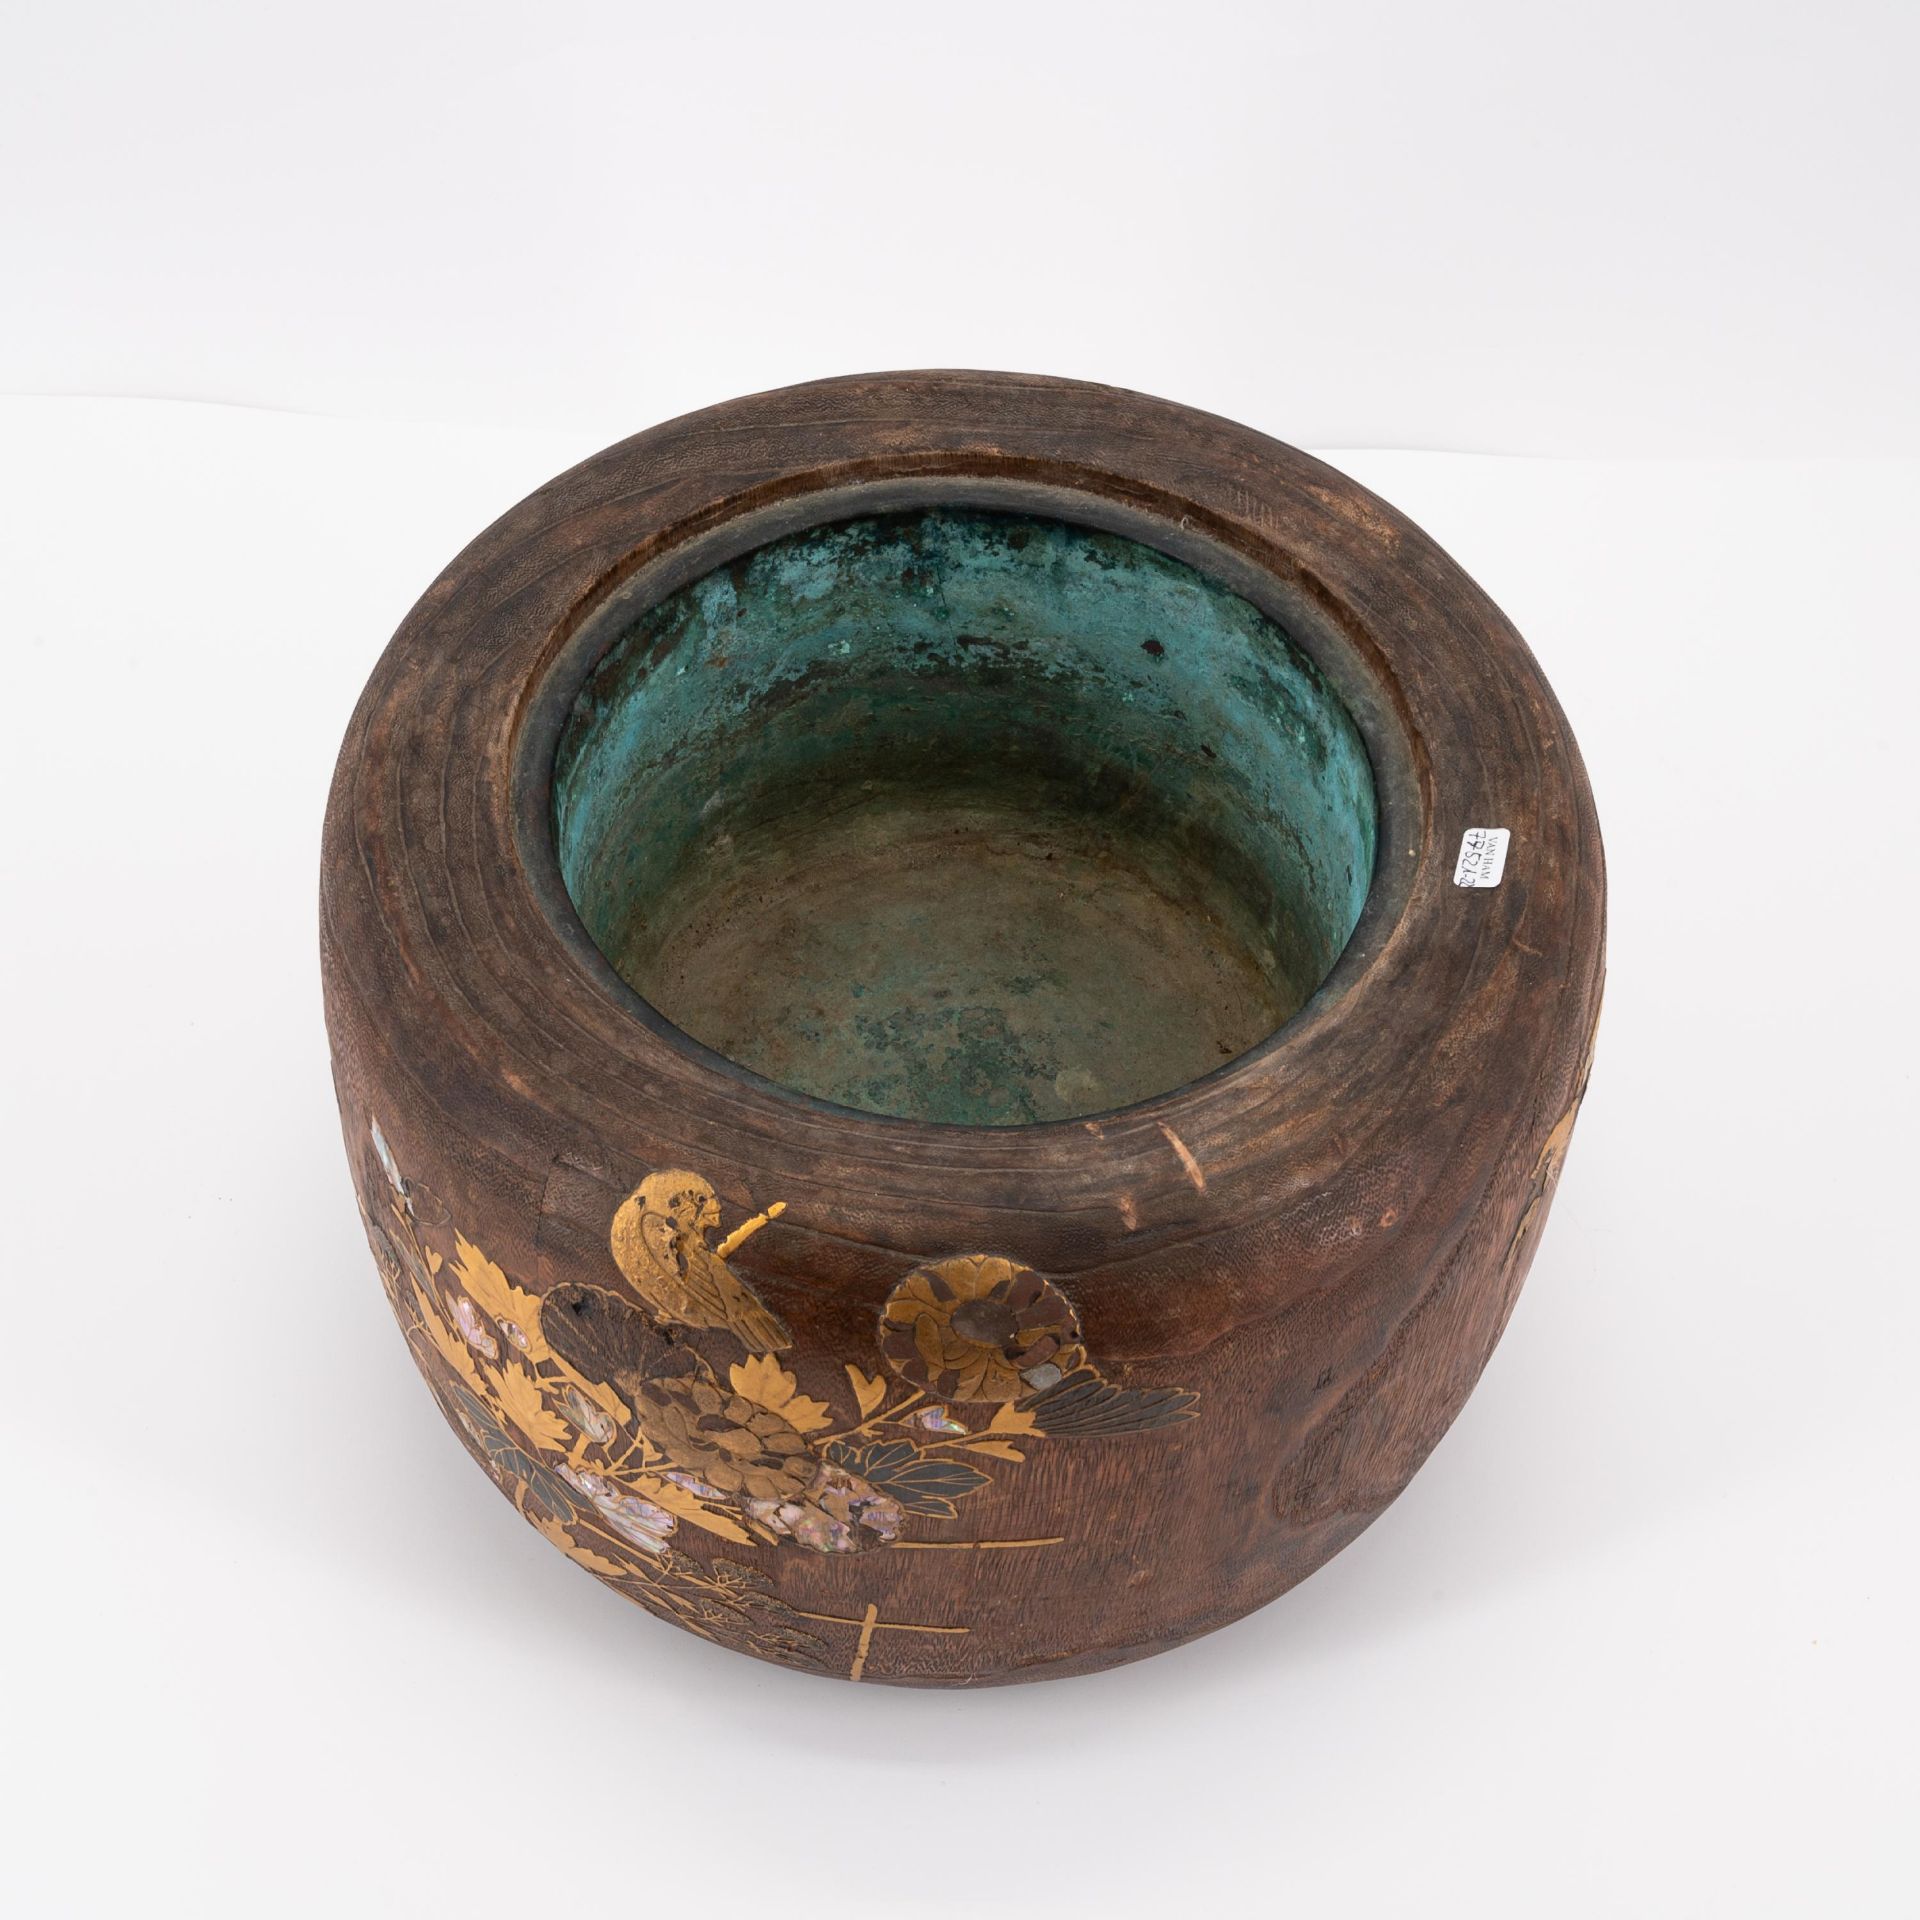 TWO WOODEN AND COPPER COAL BASINS, SO-CALLED HIBACHI WITH FLORAL DECOR - Image 5 of 11